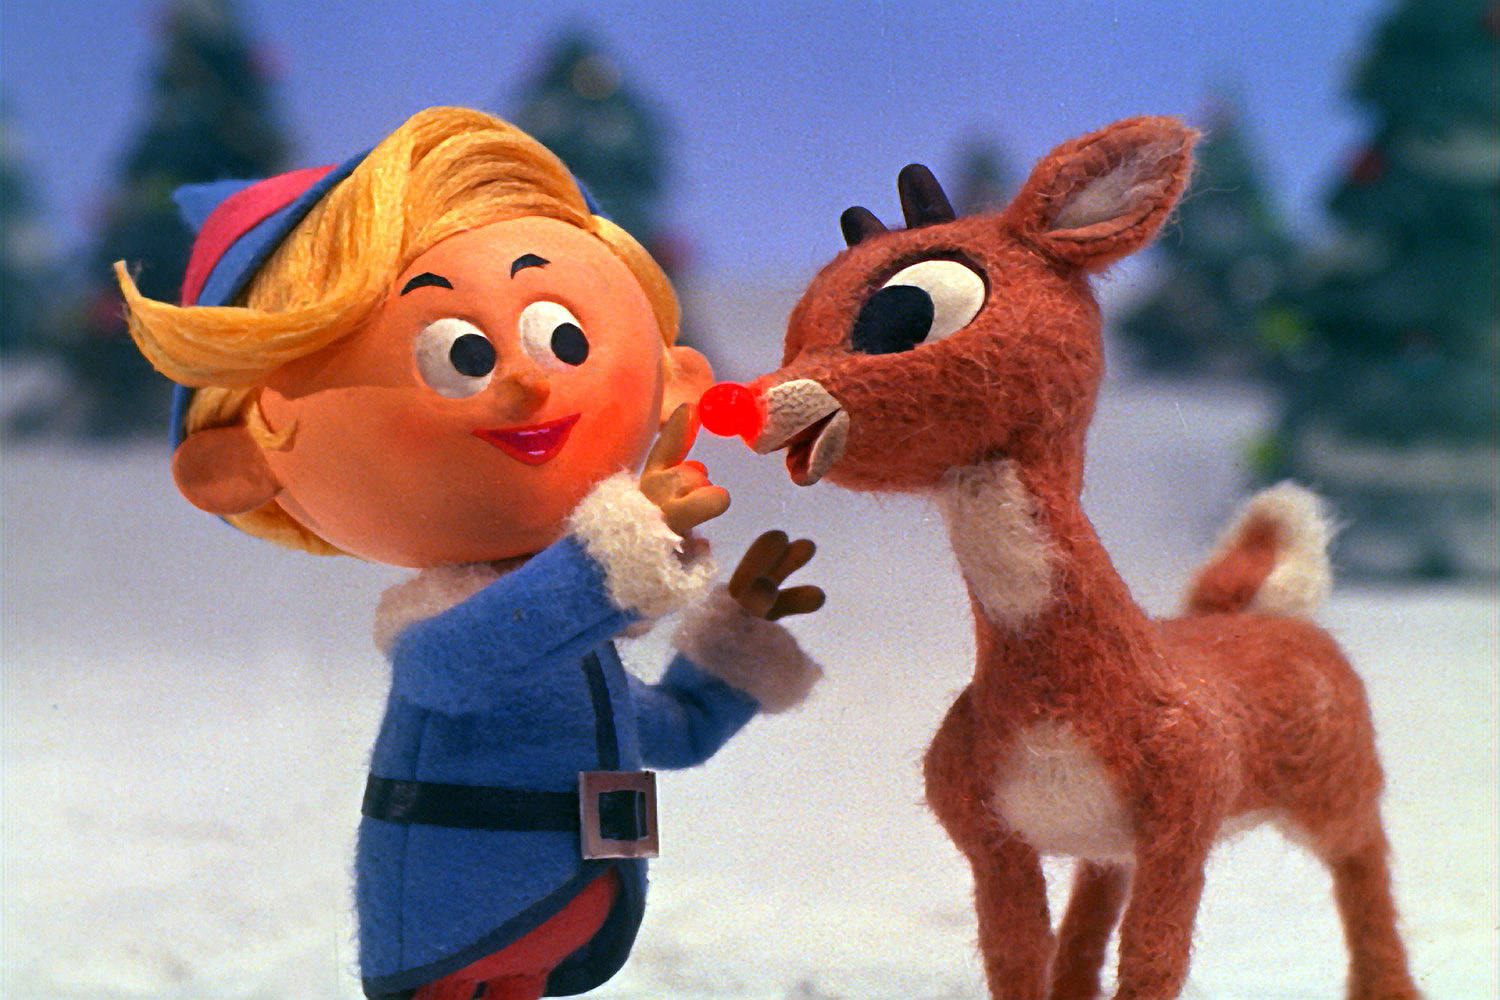 Hermey and Rudolph in a scene from the movie "Rudolph the Red-Nosed Reindeer."